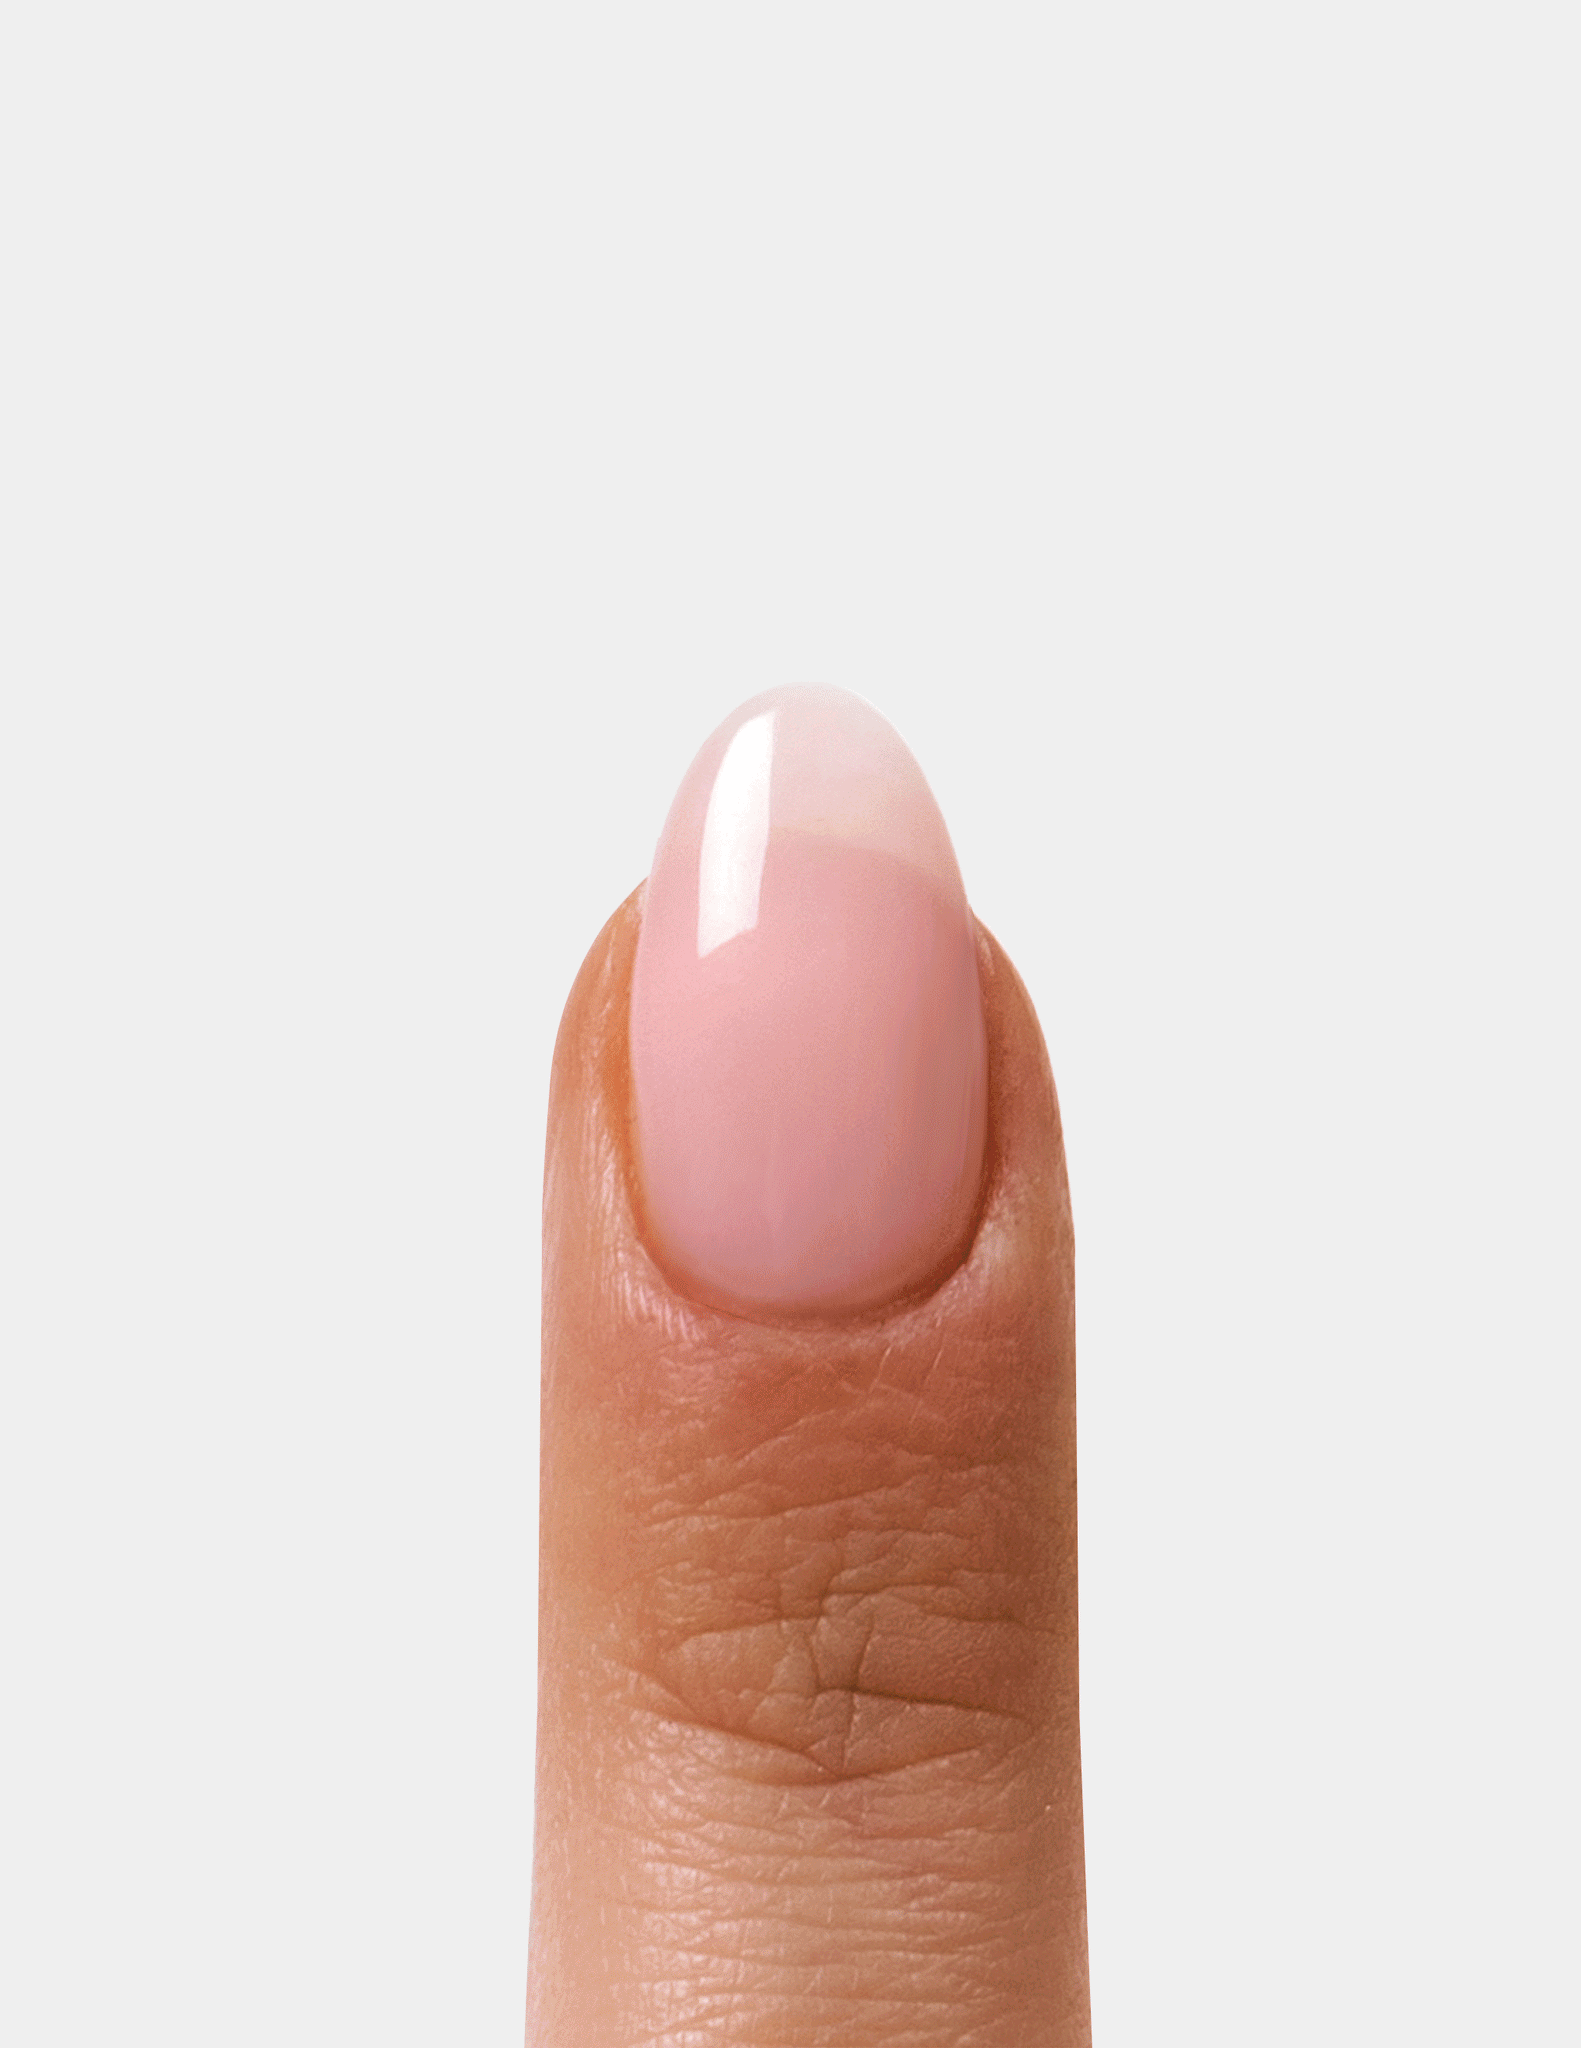 A Hard Gel Manicure Is the Secret to My Long Nails — Here's Why | Allure